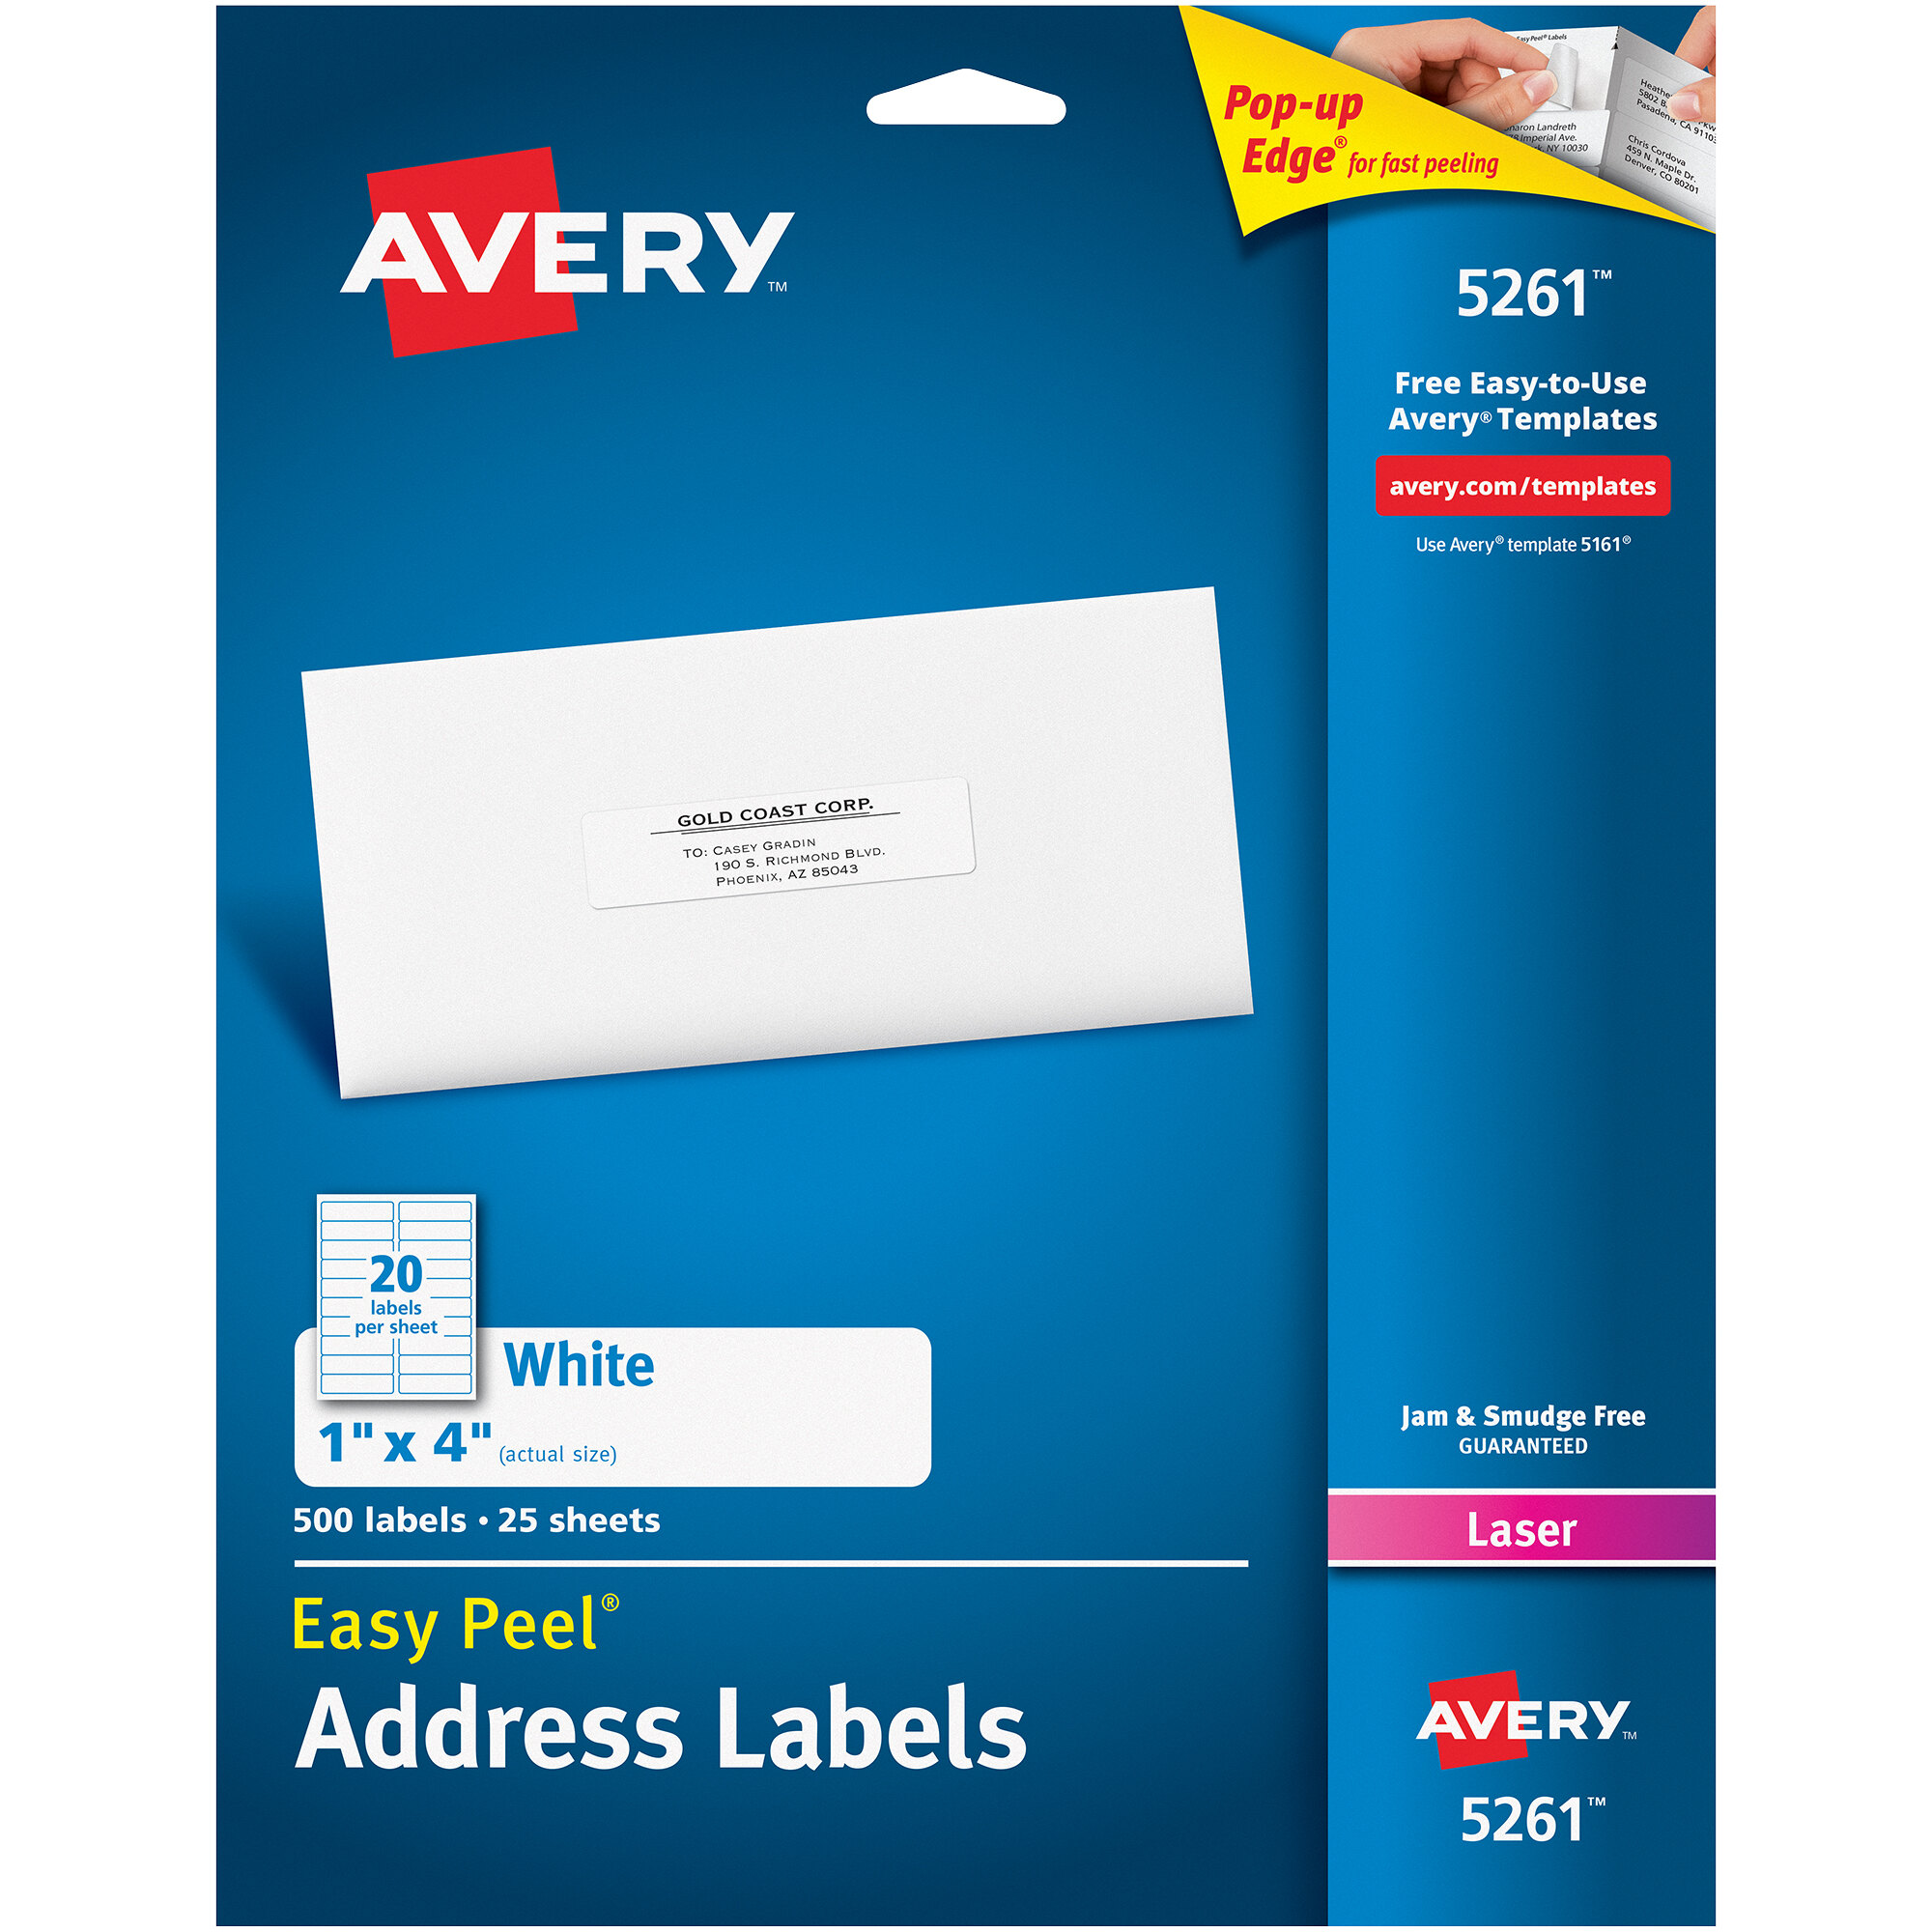 avery-5261-easy-peel-1-x-4-printable-mailing-address-labels-500-pack